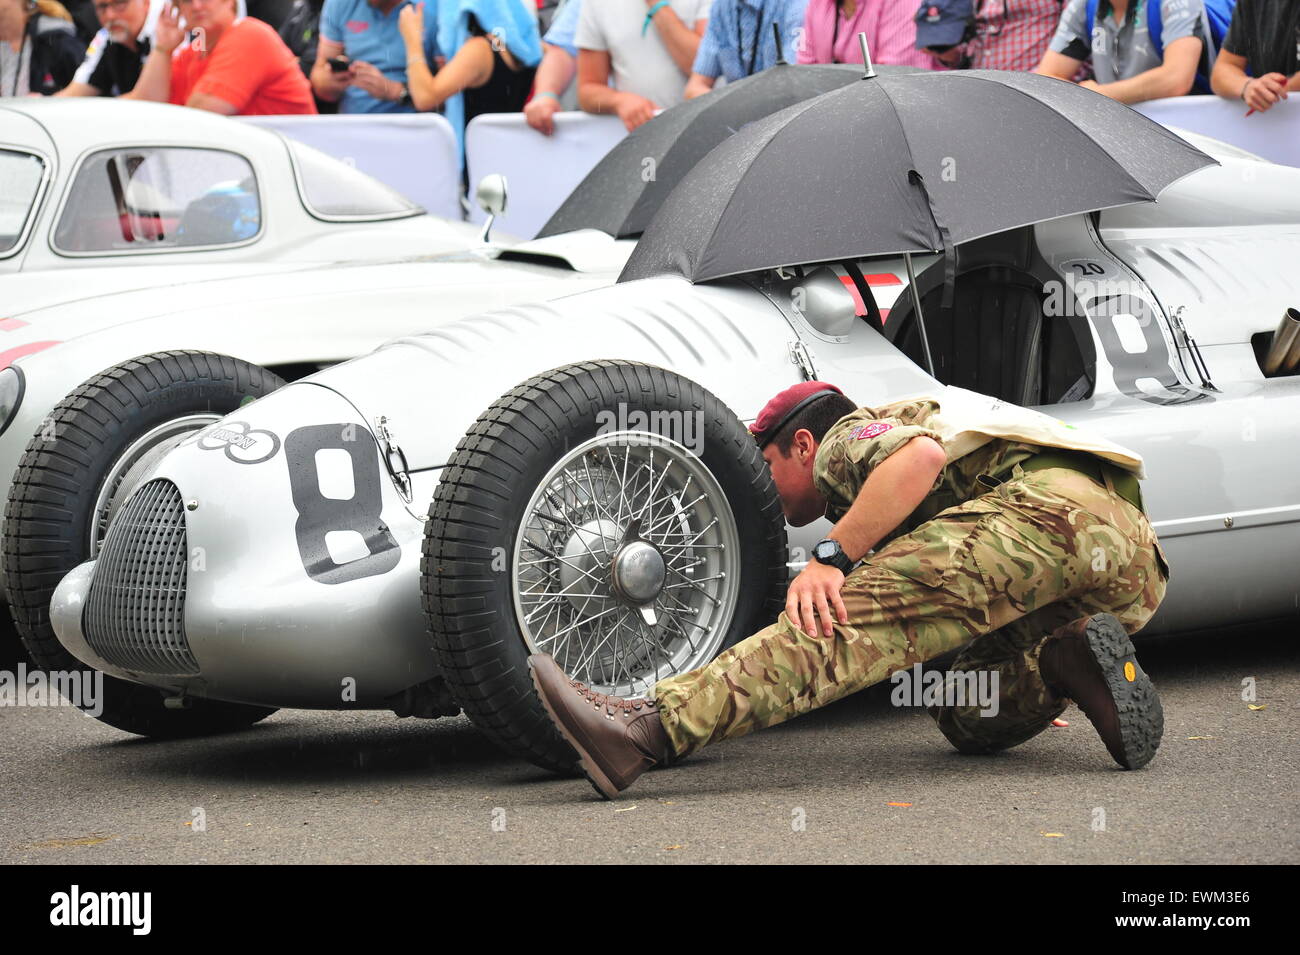 A soldier admires an Auto Union racing car at the Goodwood Festival of Speed. Racing drivers, celebrities and thousands of members of the public attended the Goodwood Festival of Speed to see modern and old racing cars and bikes in action. Stock Photo